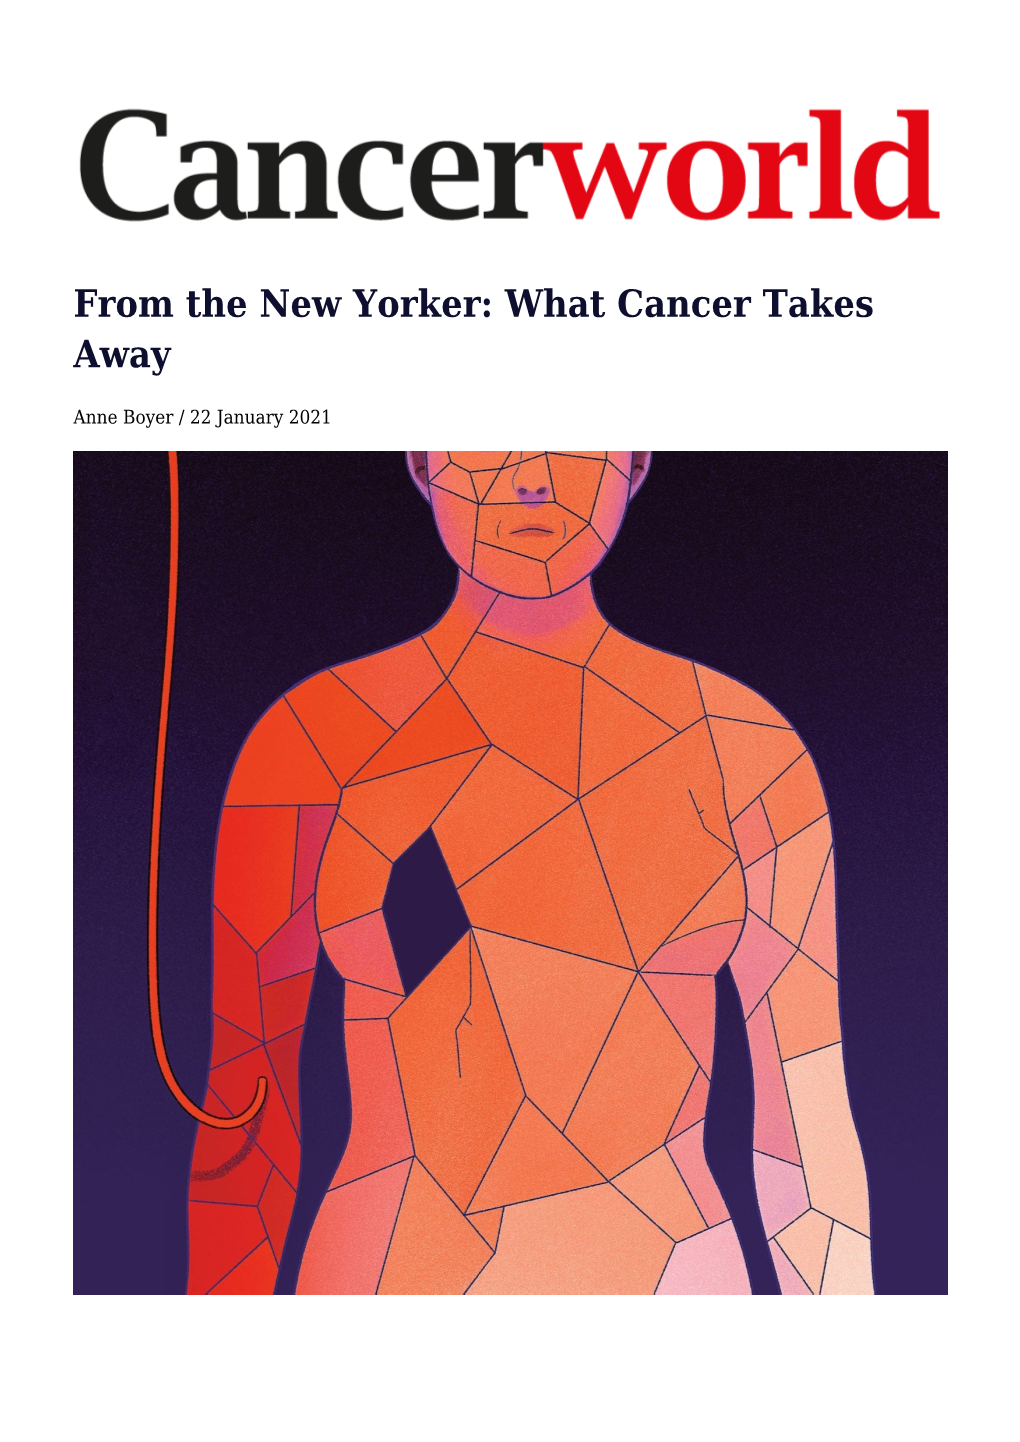 From the New Yorker: What Cancer Takes Away